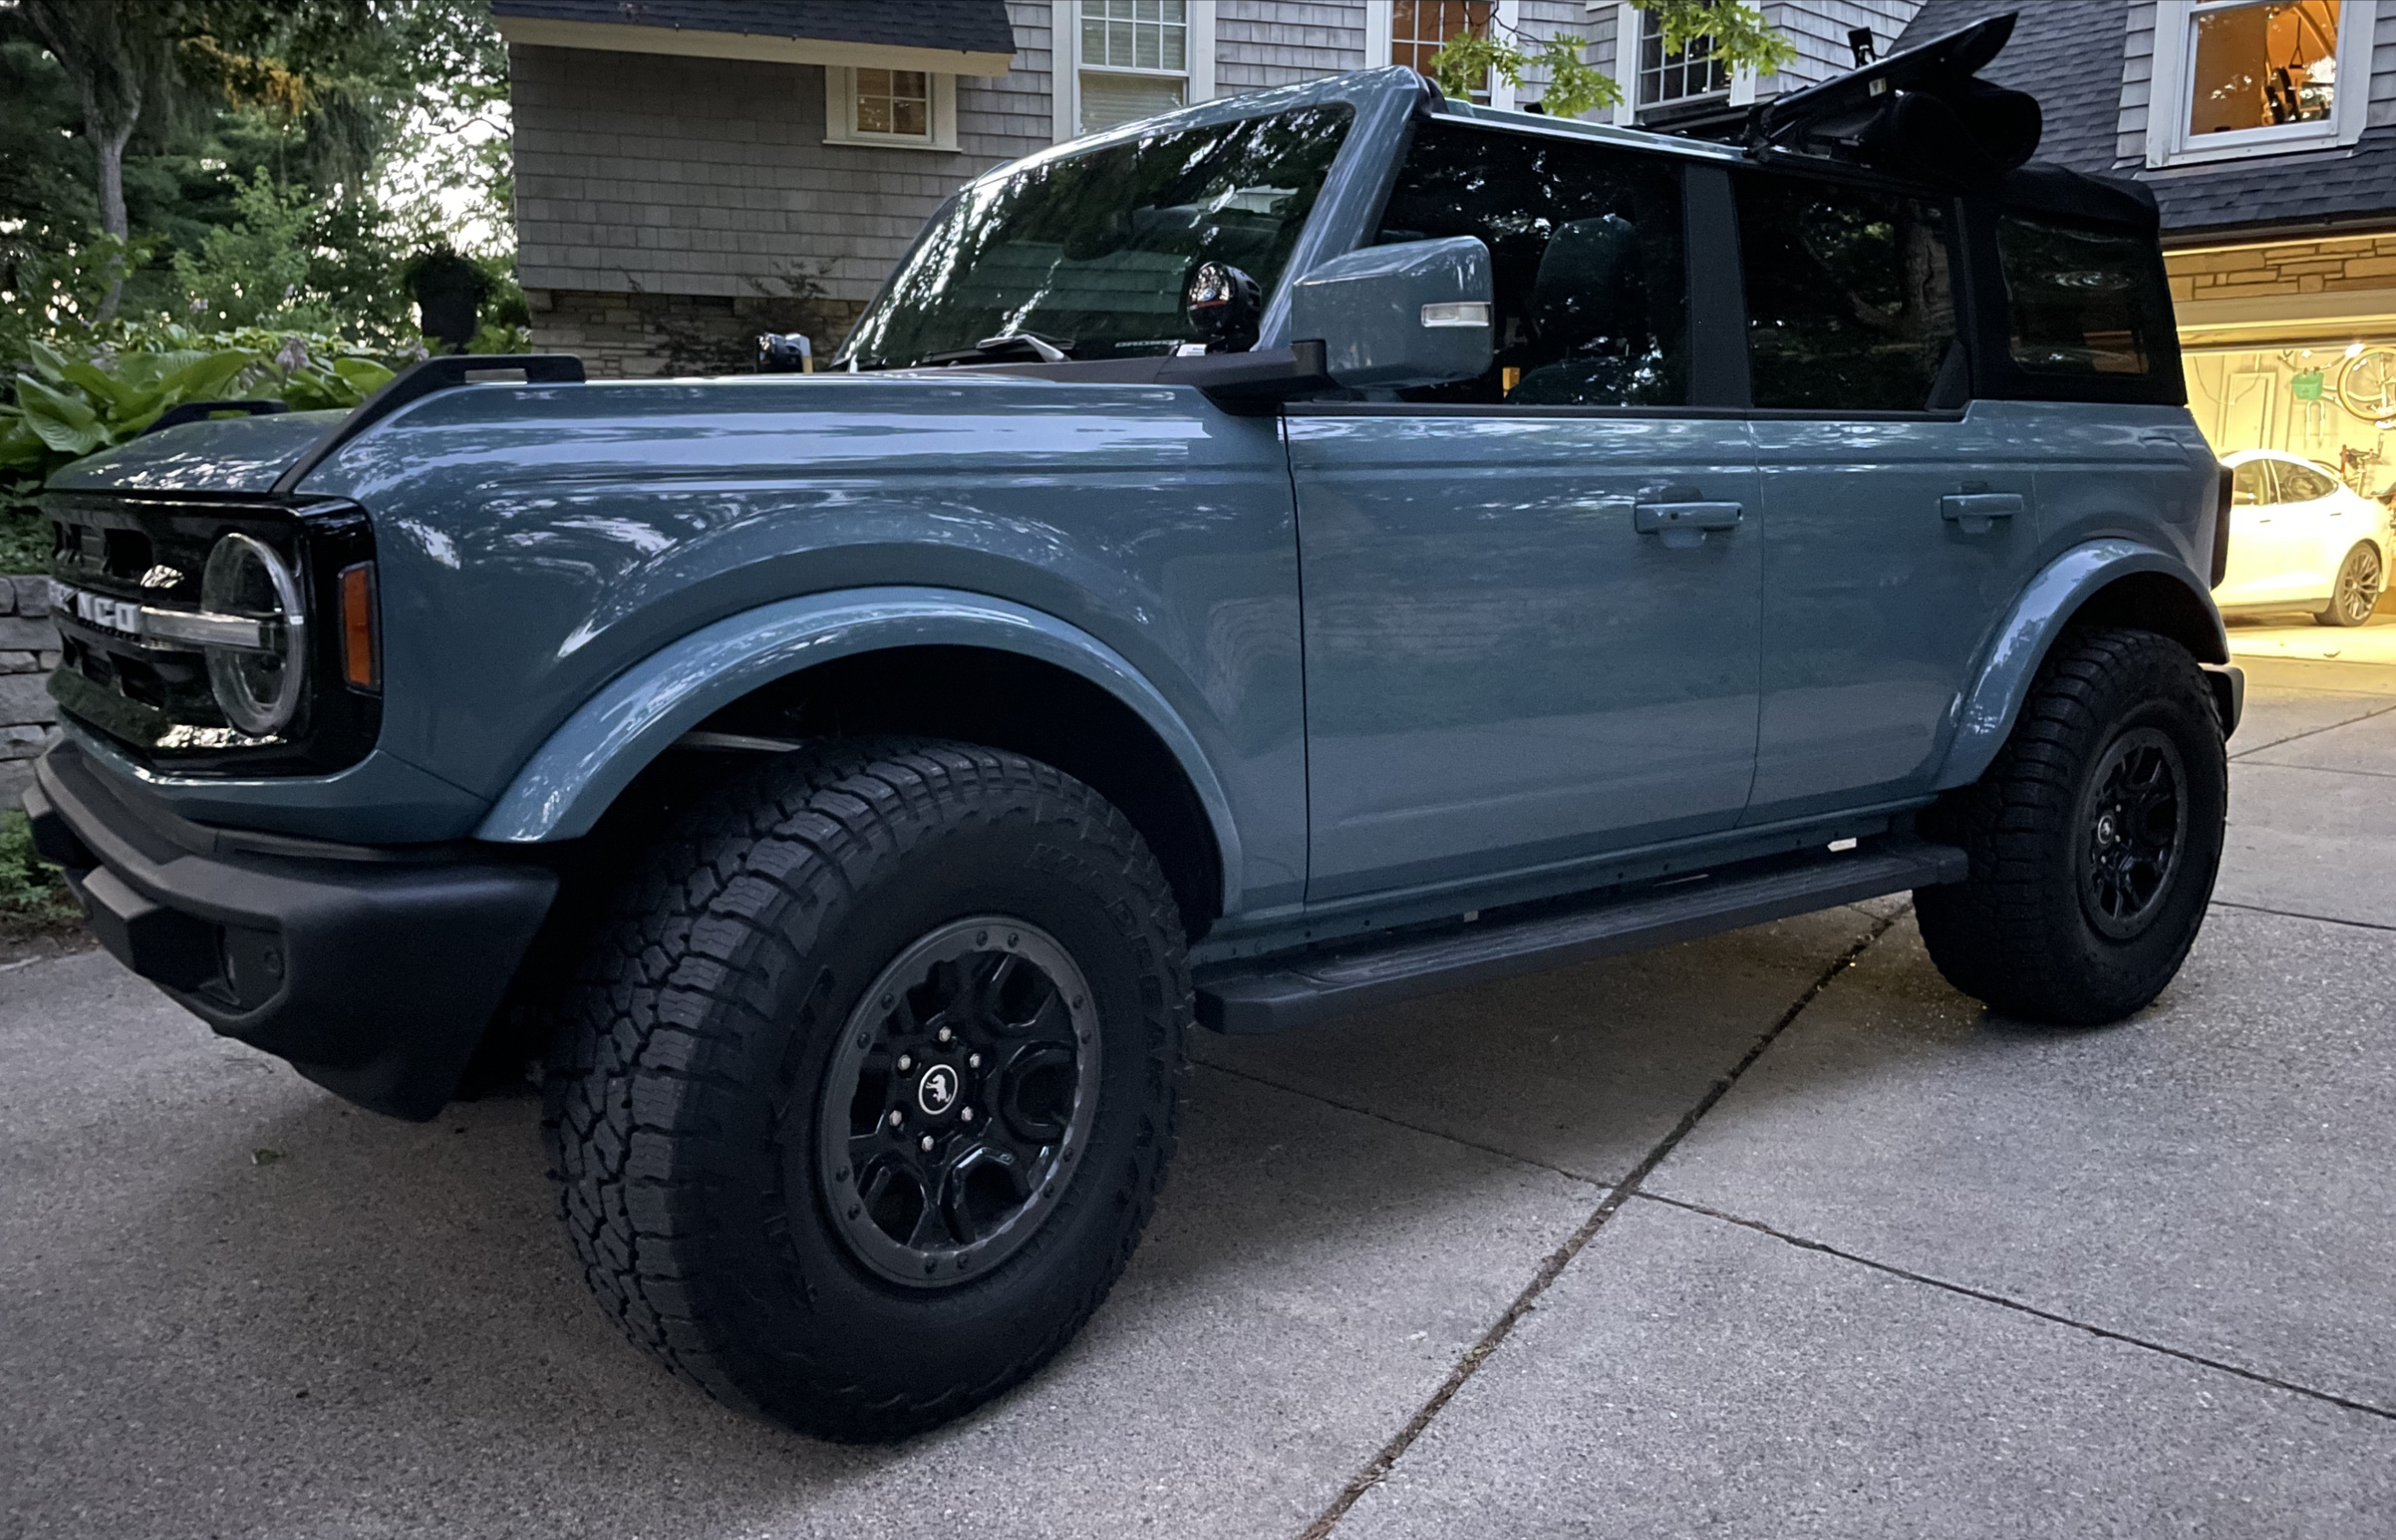 Ford Bronco Tint reference gallery -- post your Bronco pics & specs 📸 😎 49EC07F5-31FE-4606-BFD7-4D2D50623DF0